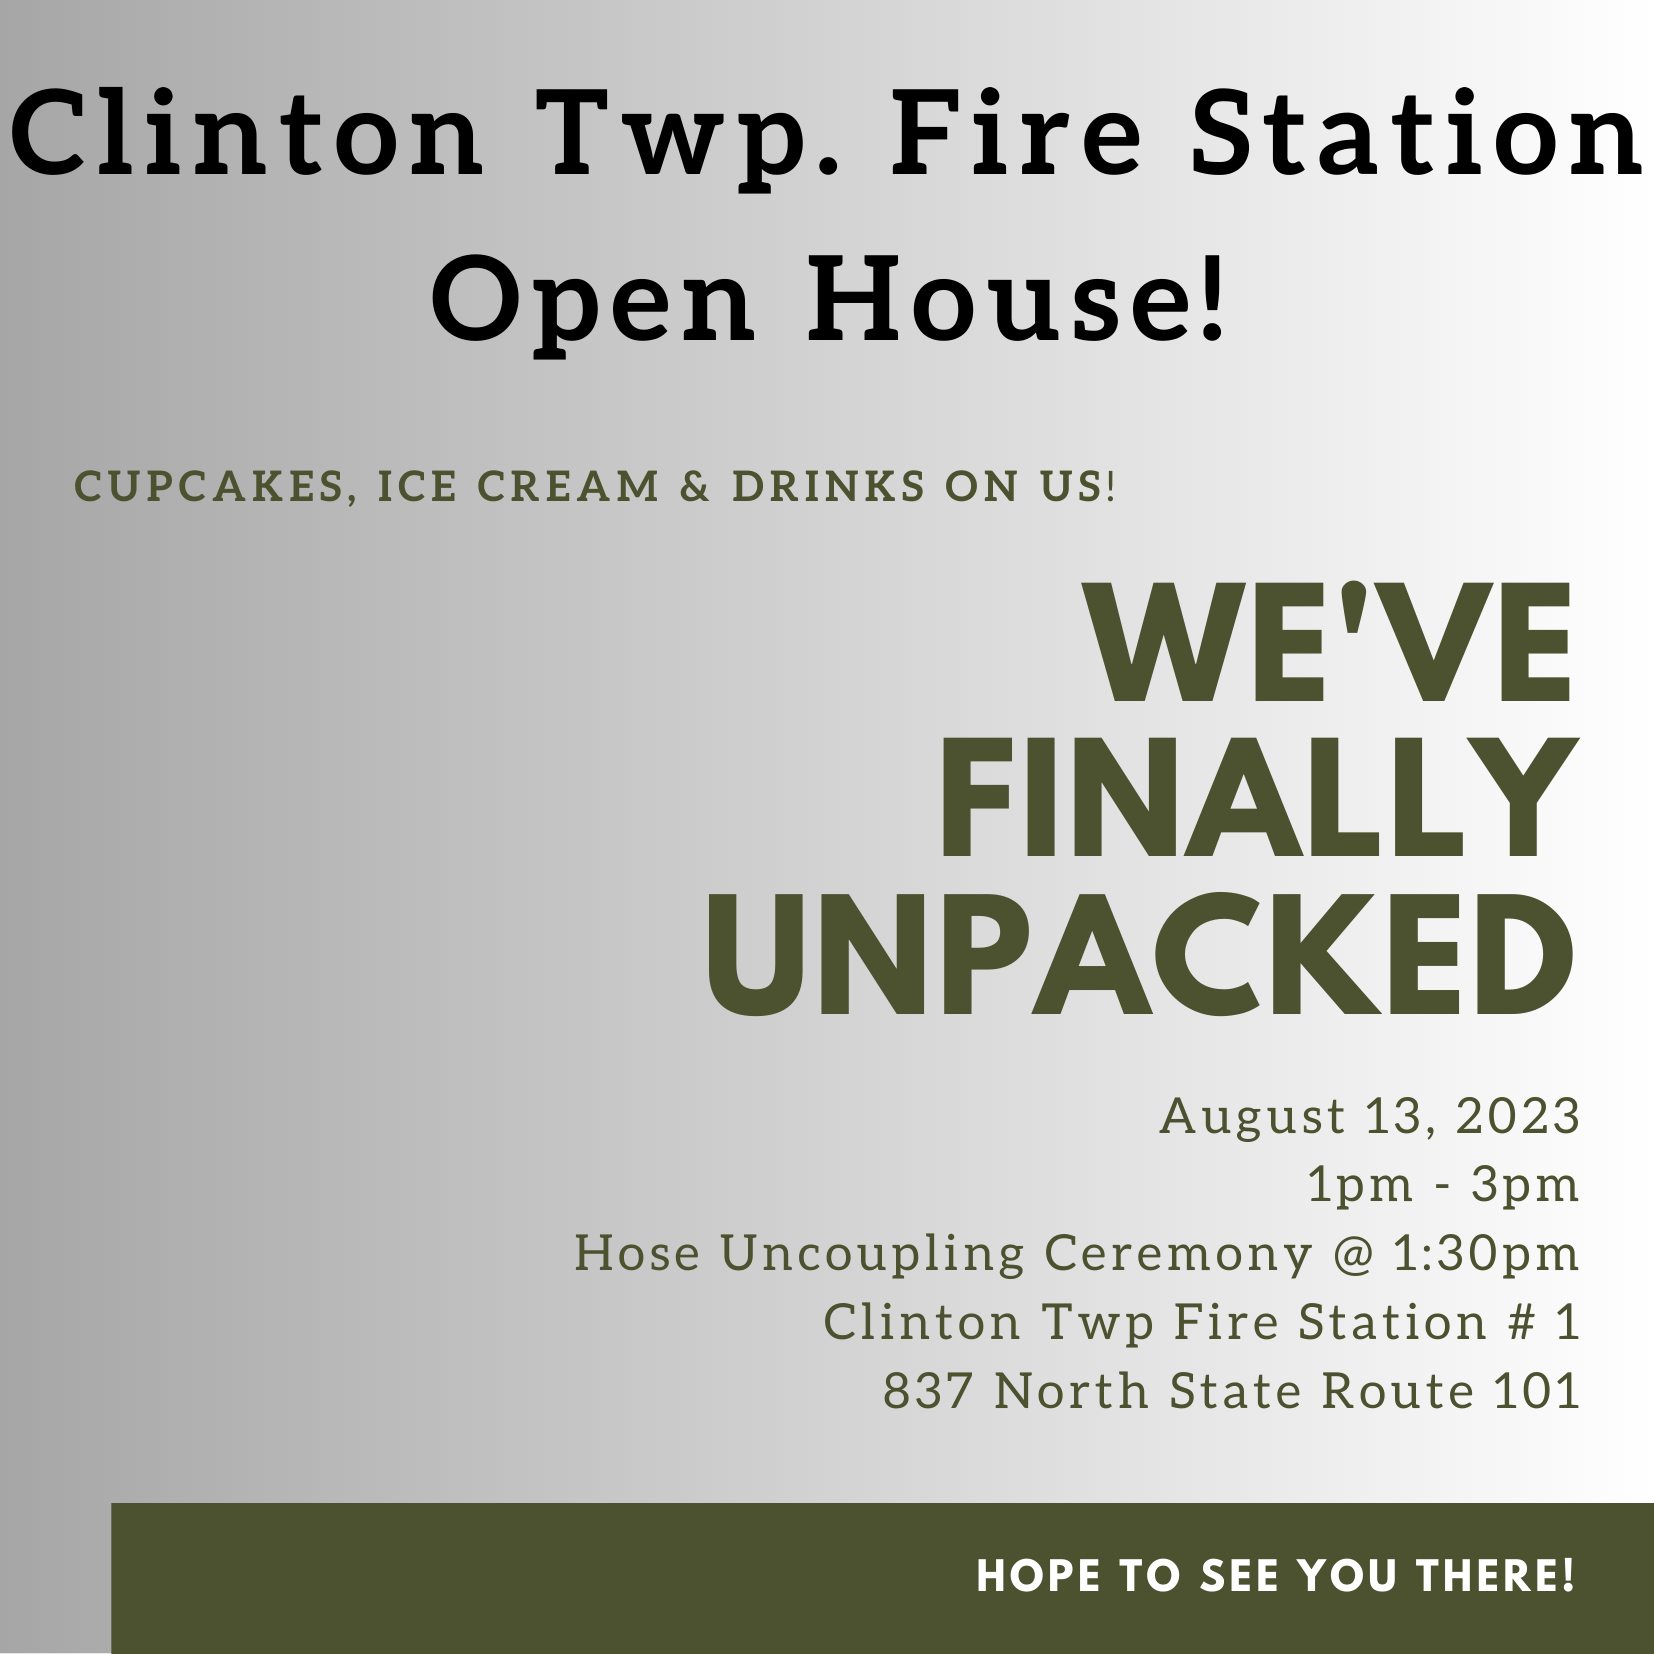 Clinton Twp. Fire Station Open House